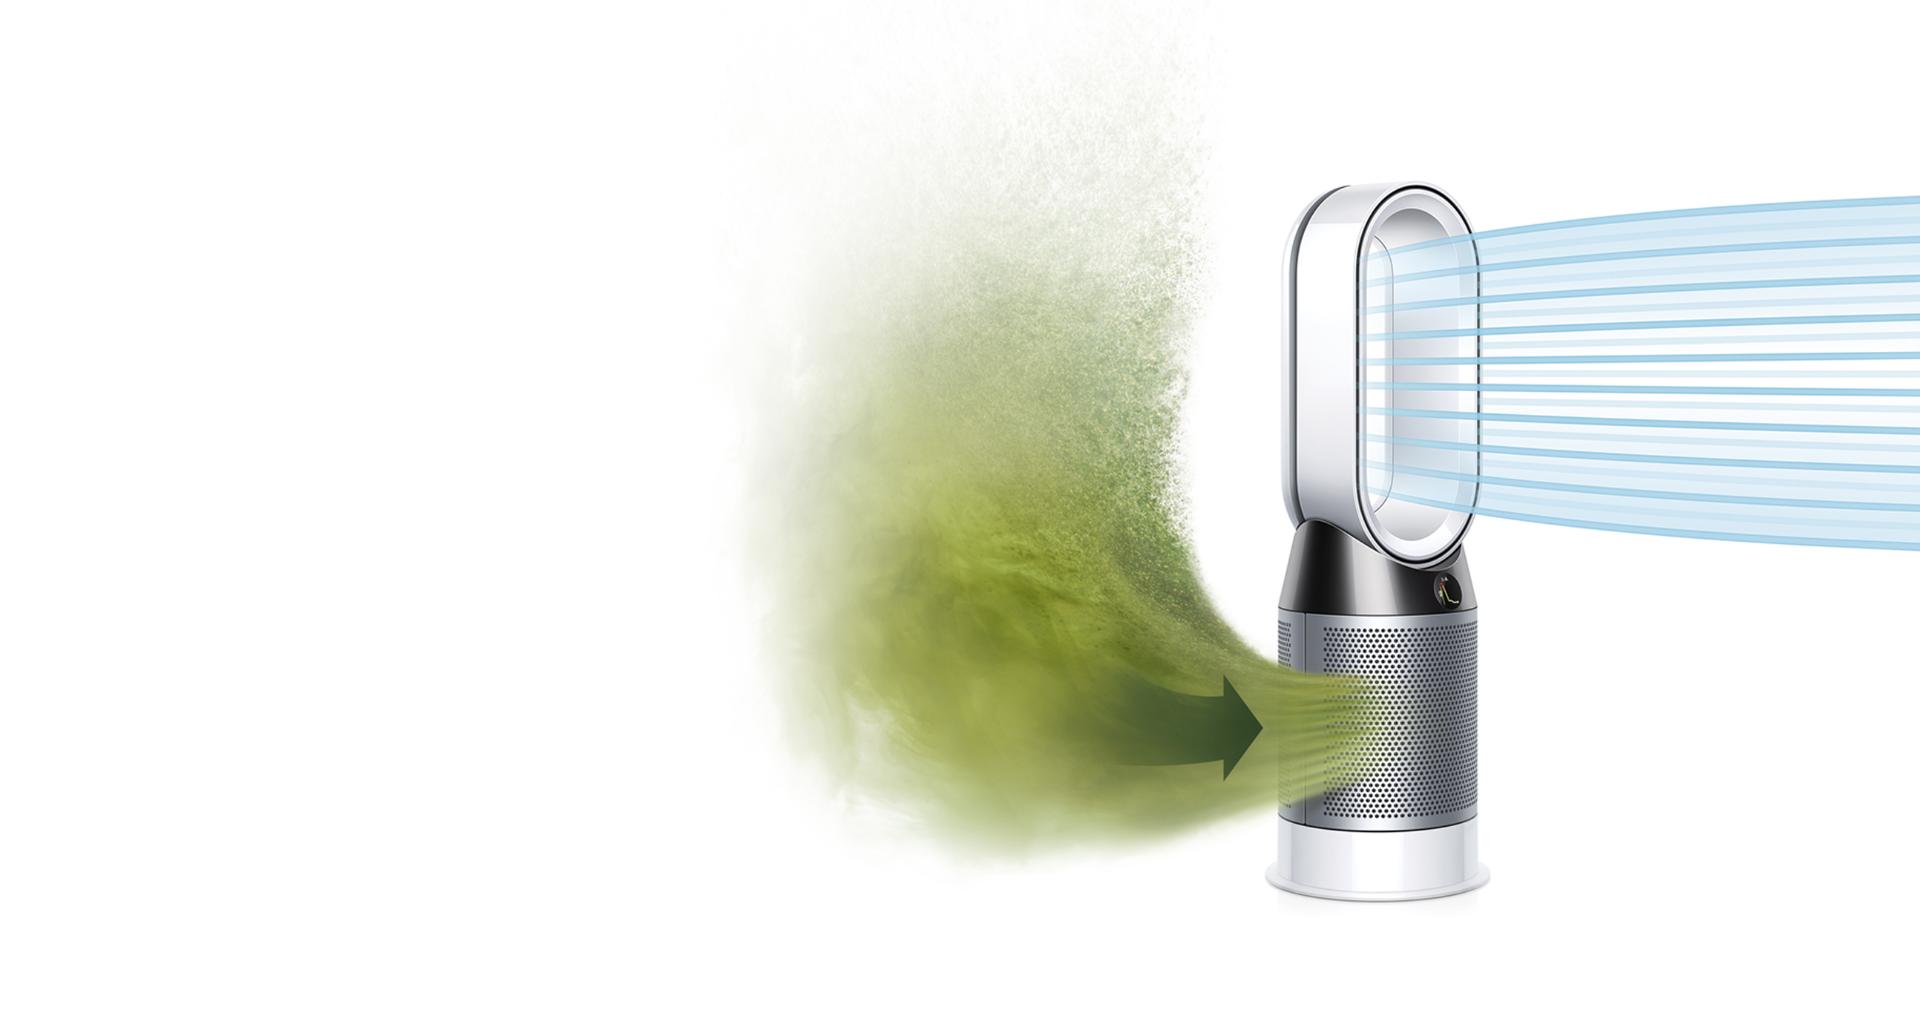 A Dyson purifier fan heater drawing in dirty air, and projecting a stream of purifed air